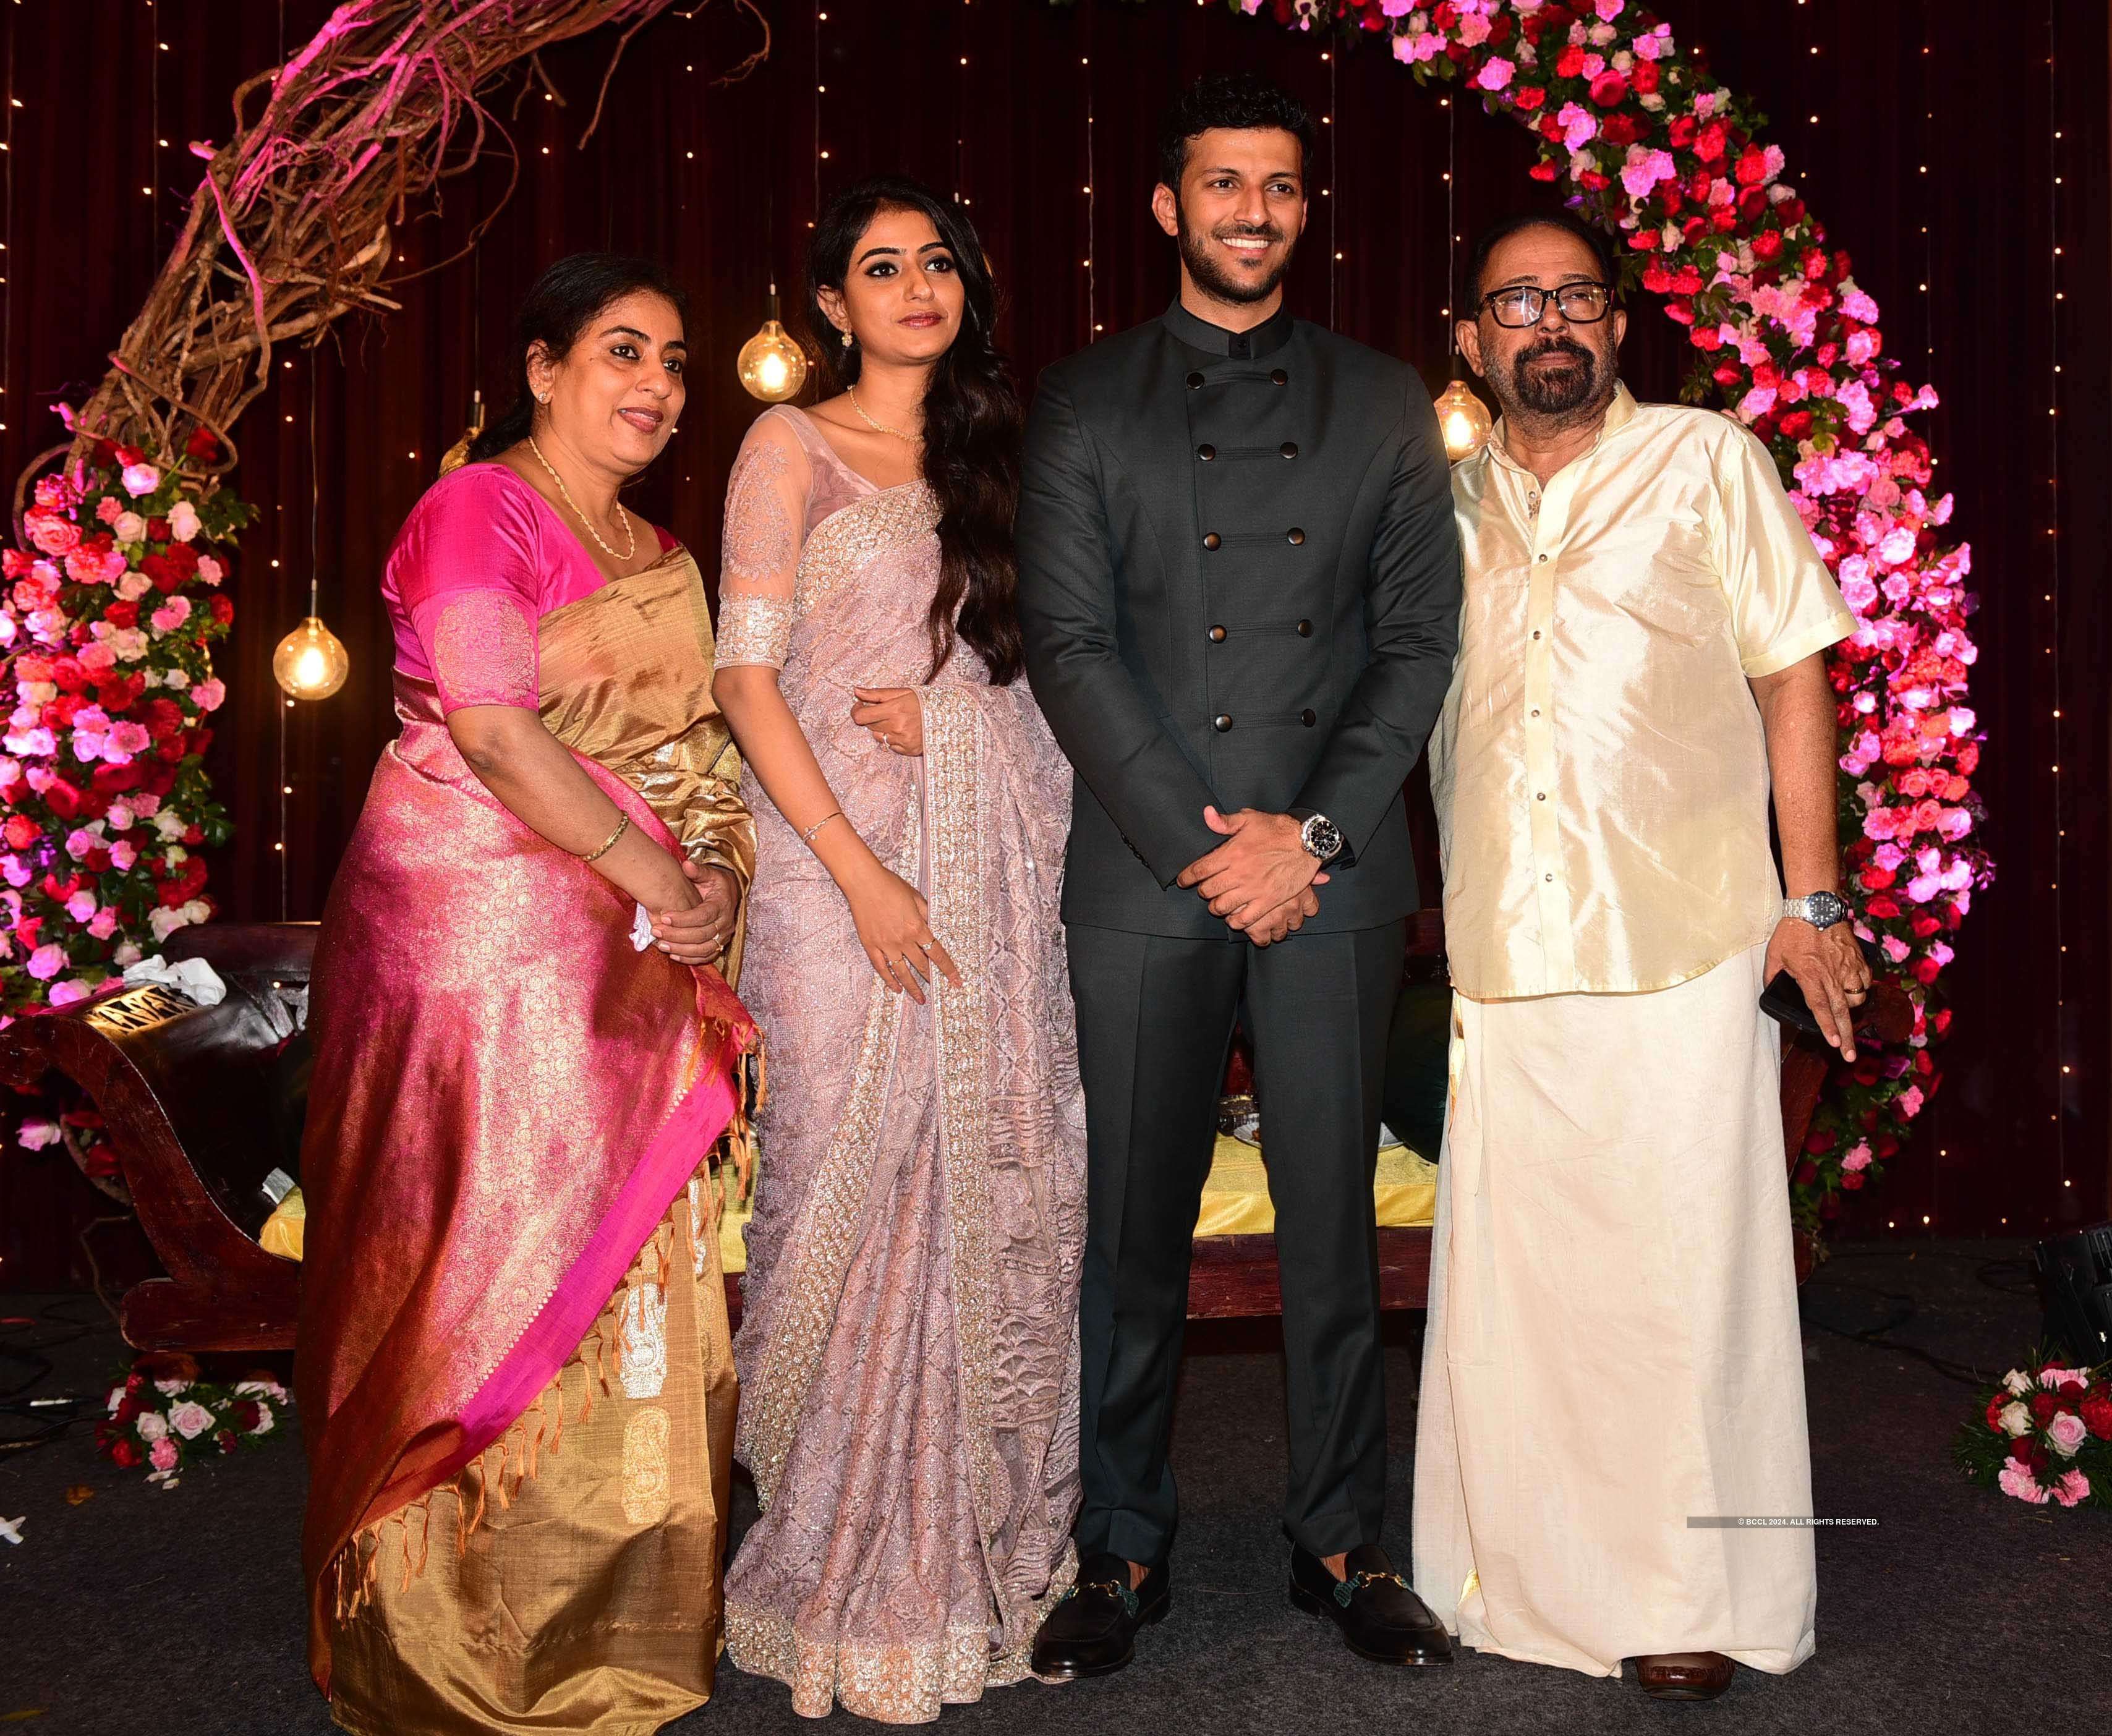 Director Sibi Malayil's daughter Zeba and Lawson's engagement ceremony